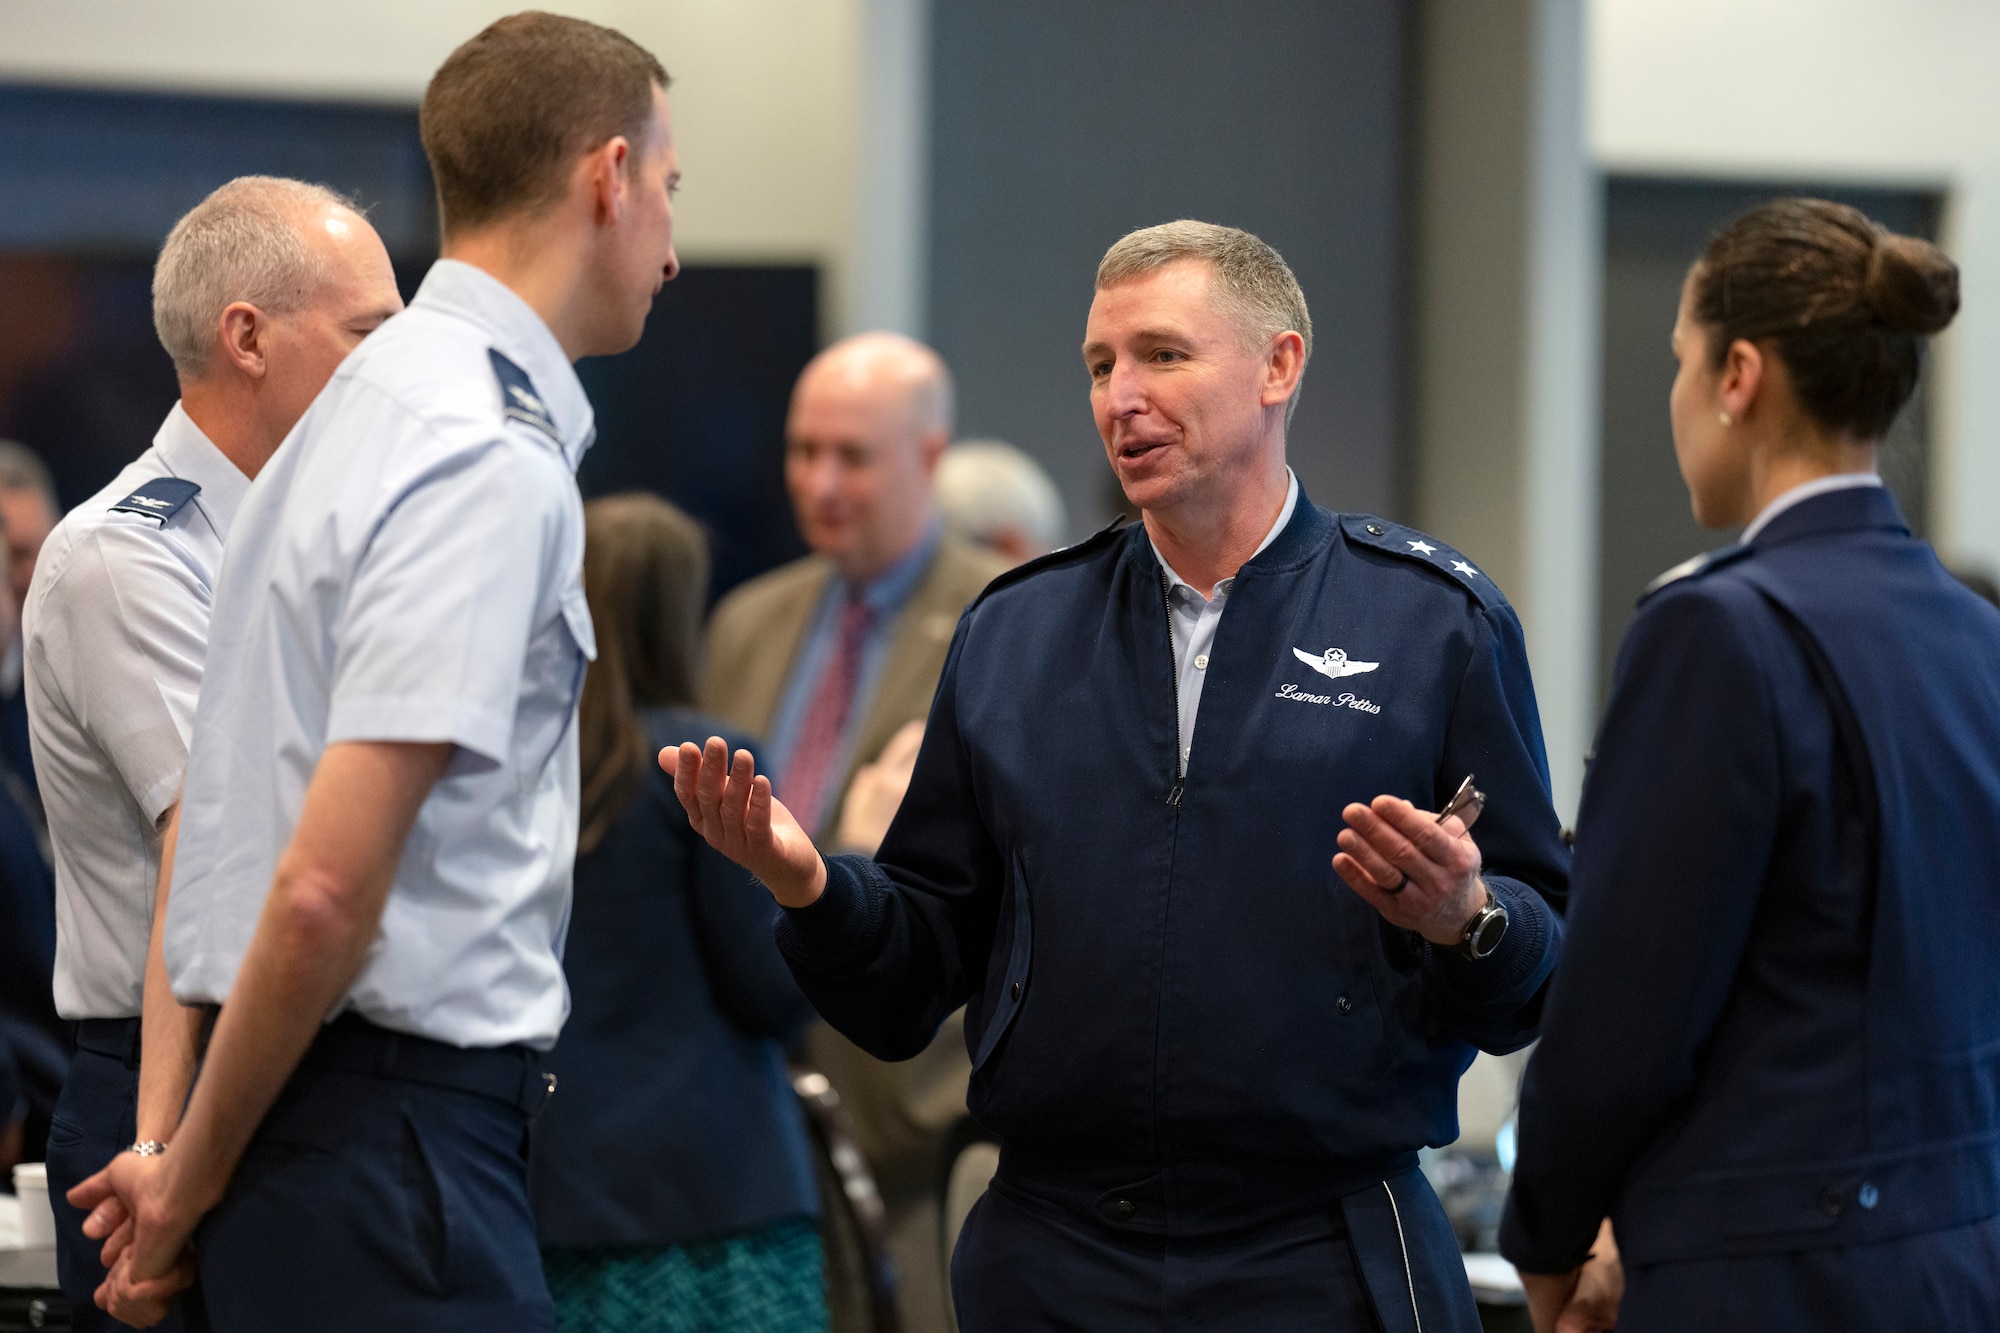 U.S. Air Force Maj. Gen. Evan Pettus, 12th Air Force (Air Forces Southern) commander, center, speaks with USAF and Peruvian air force delegates during the South American Air Chiefs Conference in Tucson, Ariz. Dec. 6, 2023.